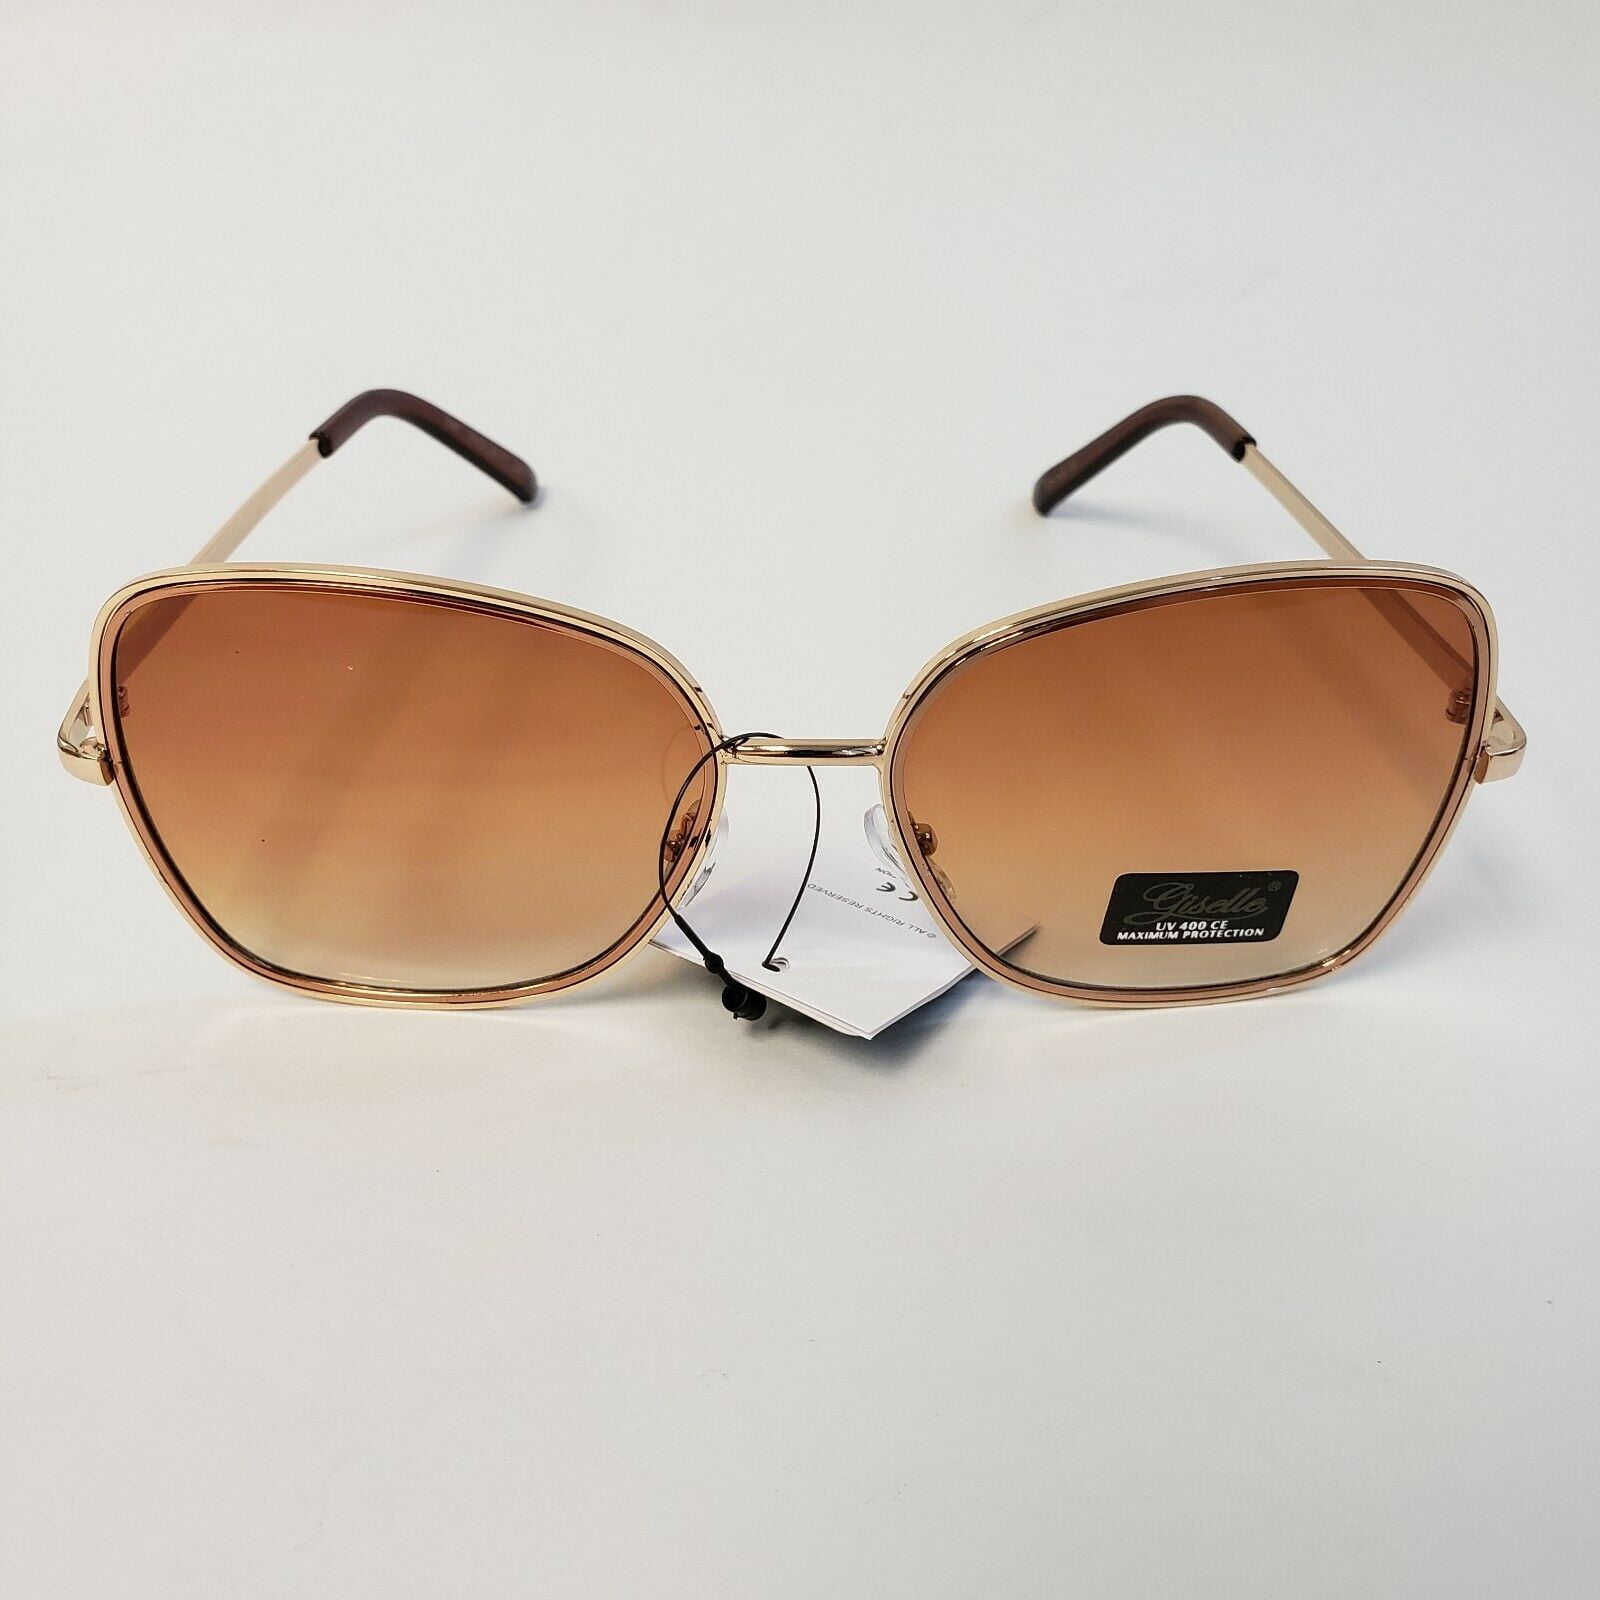 Sunglasses Giselle Style Fashion Designer Gold and Brown 